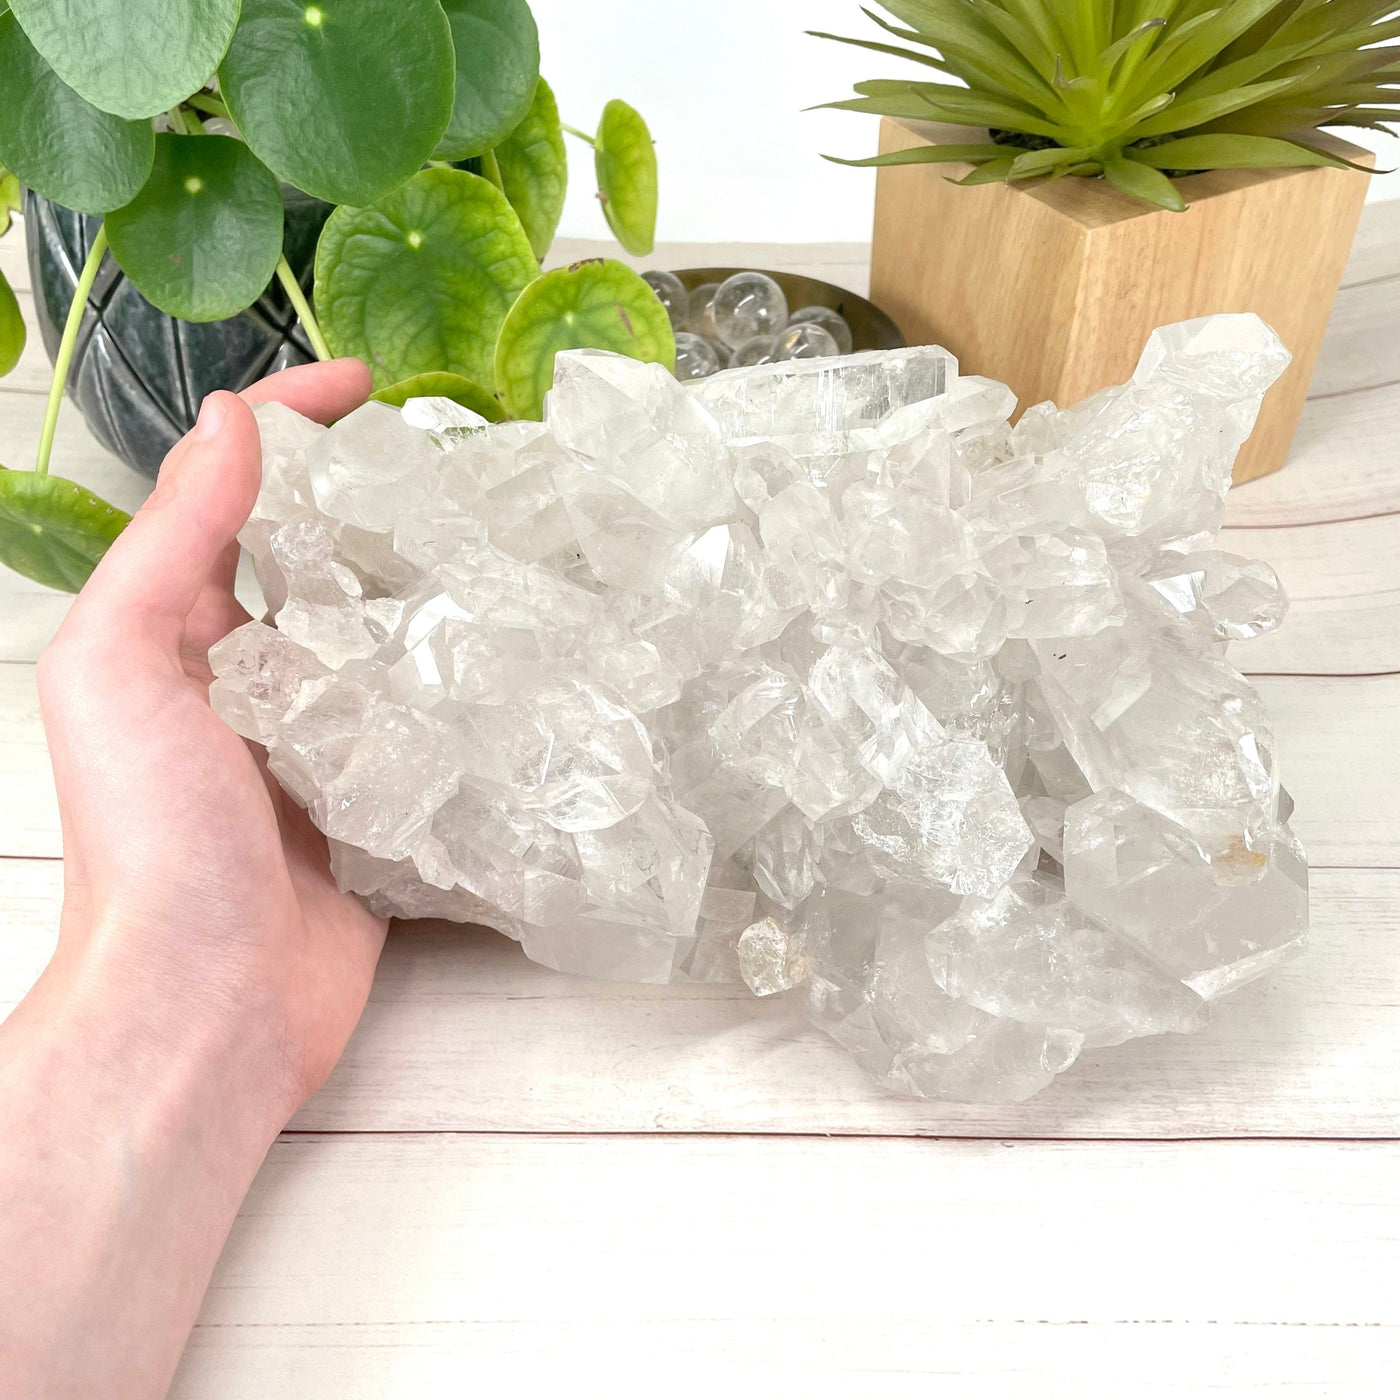 crystal quartz cluster with hand on display for size reference